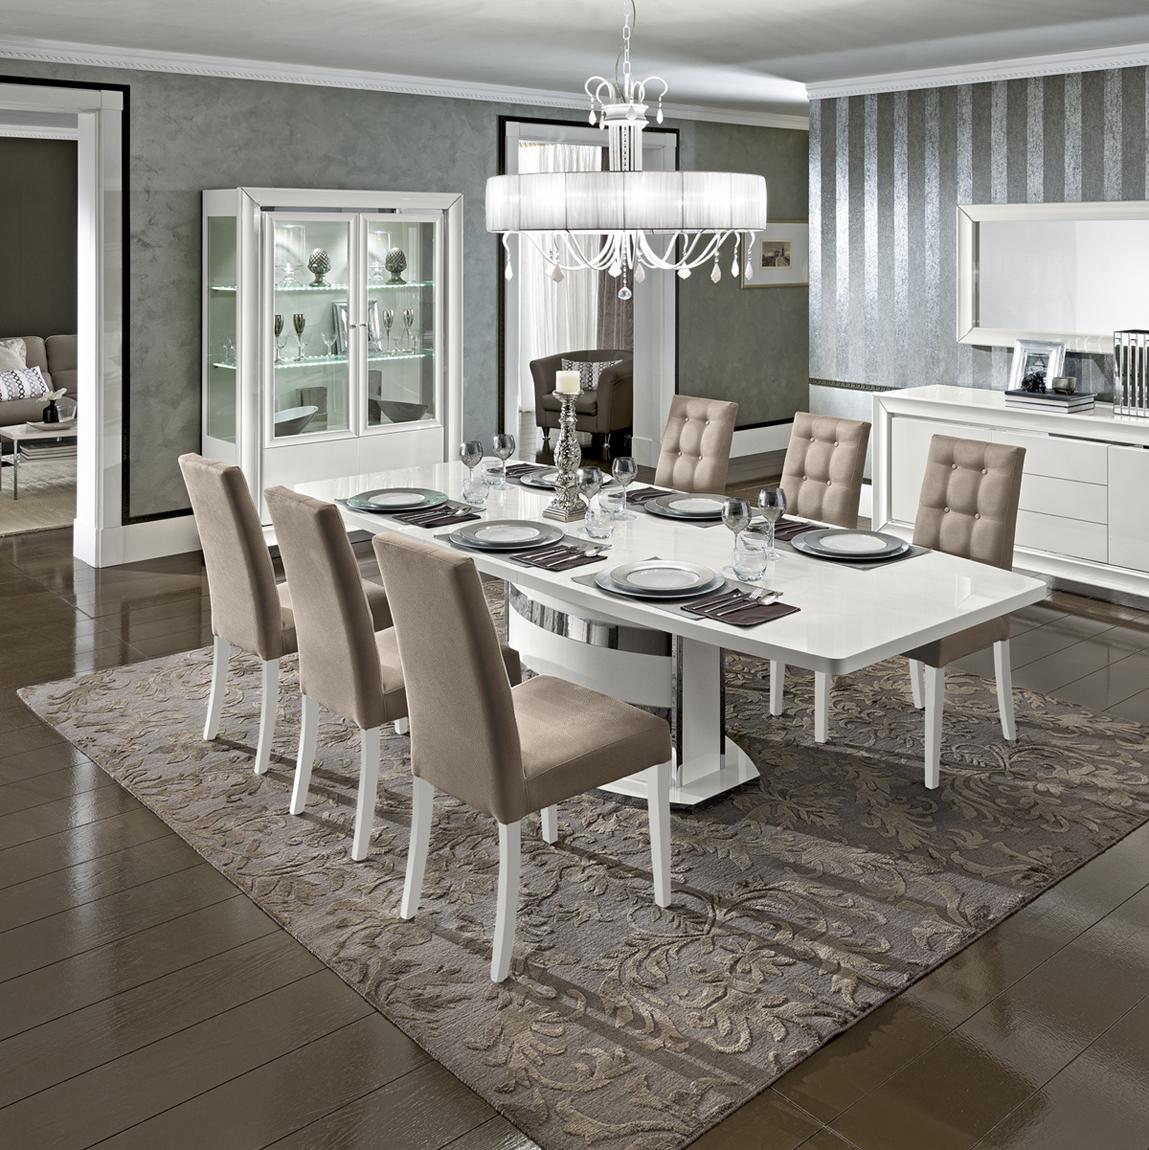 Contemporary, Modern Dining Table Set Dama Bianca Dama Bianca-Dining-7PC in White, Beige Fabric